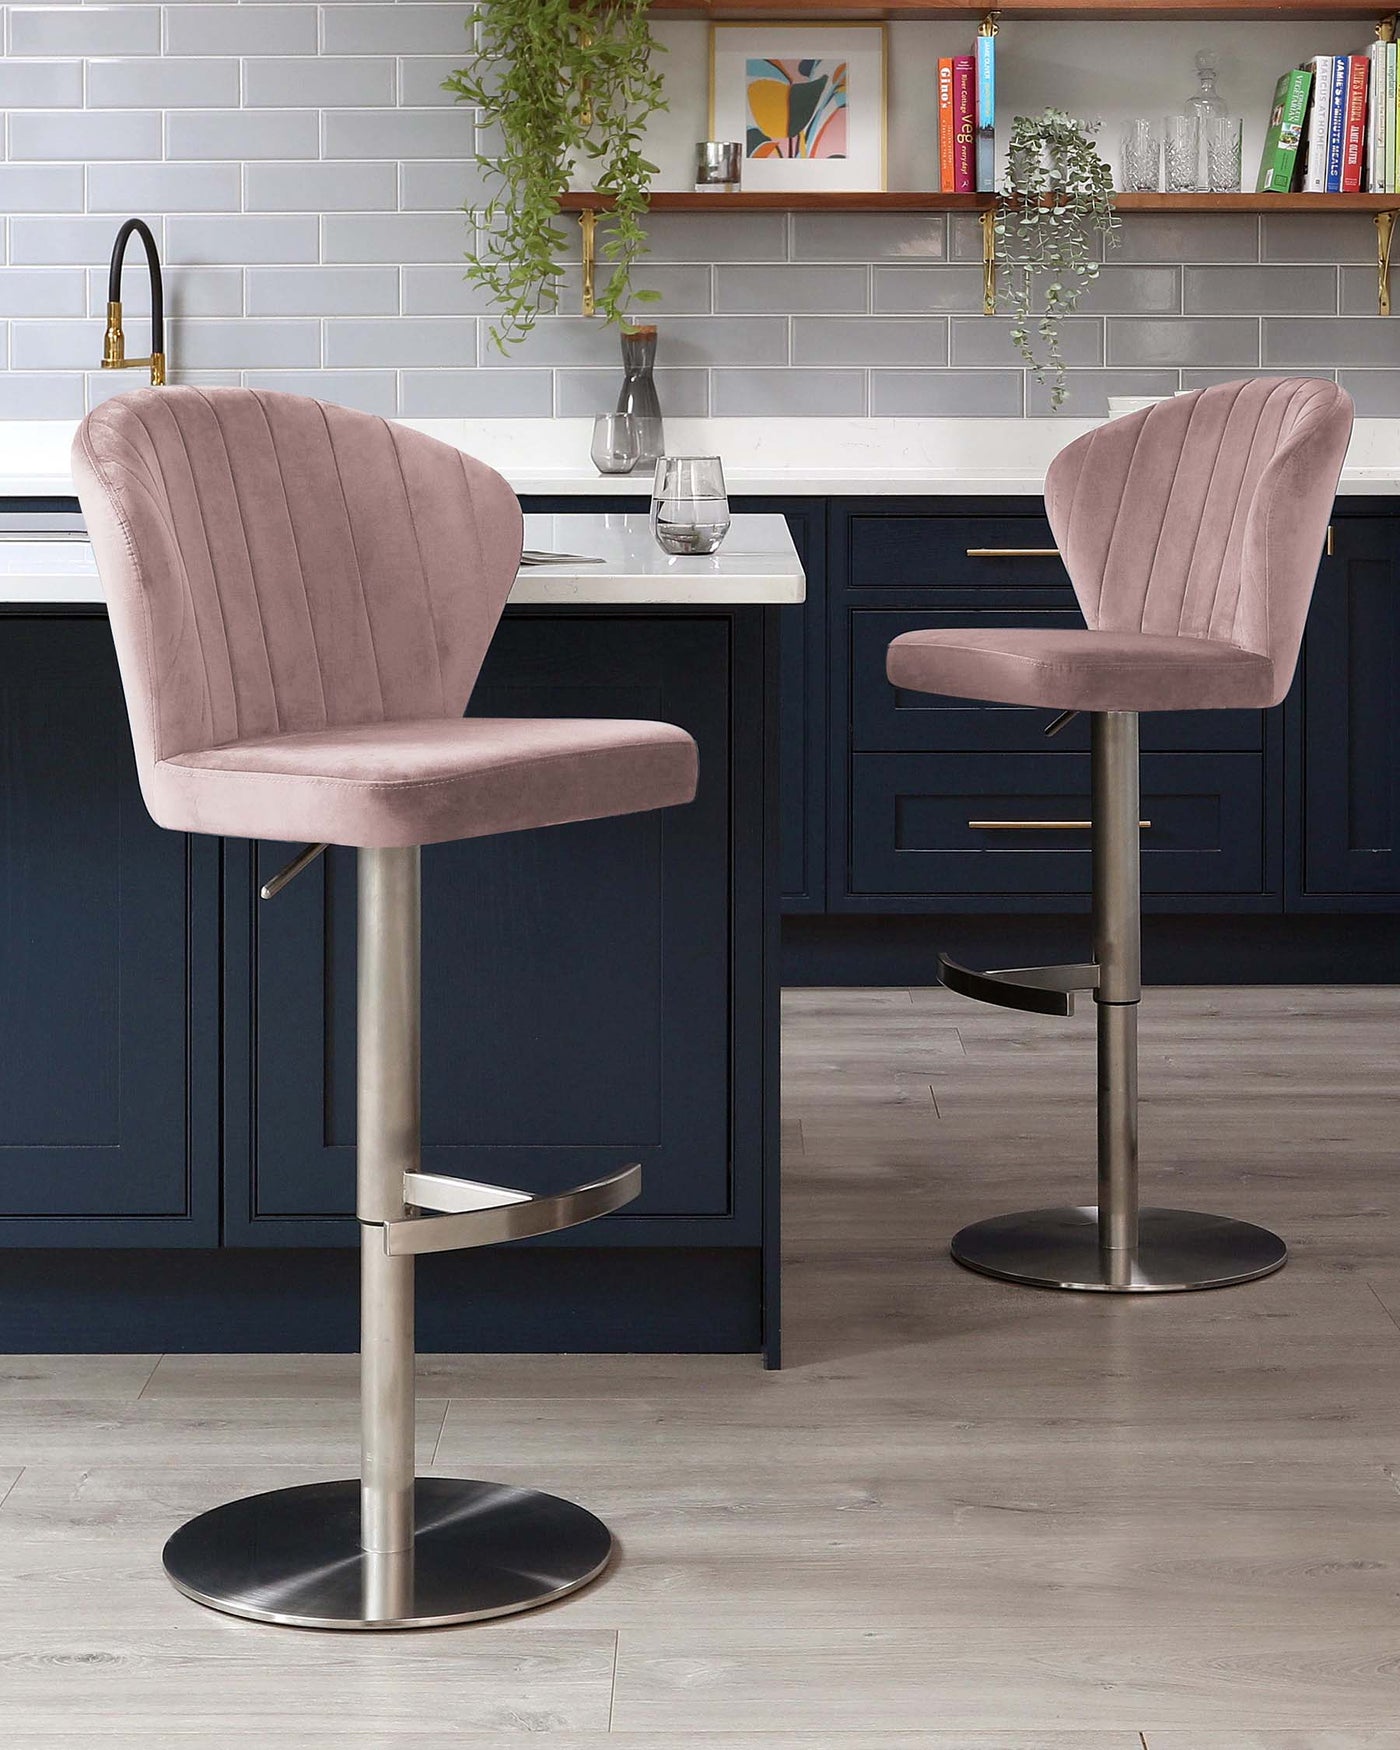 Two contemporary blush pink velvet bar stools with vertical channel tufting, curved backrests, and footrests on adjustable height brushed metal pedestal bases.